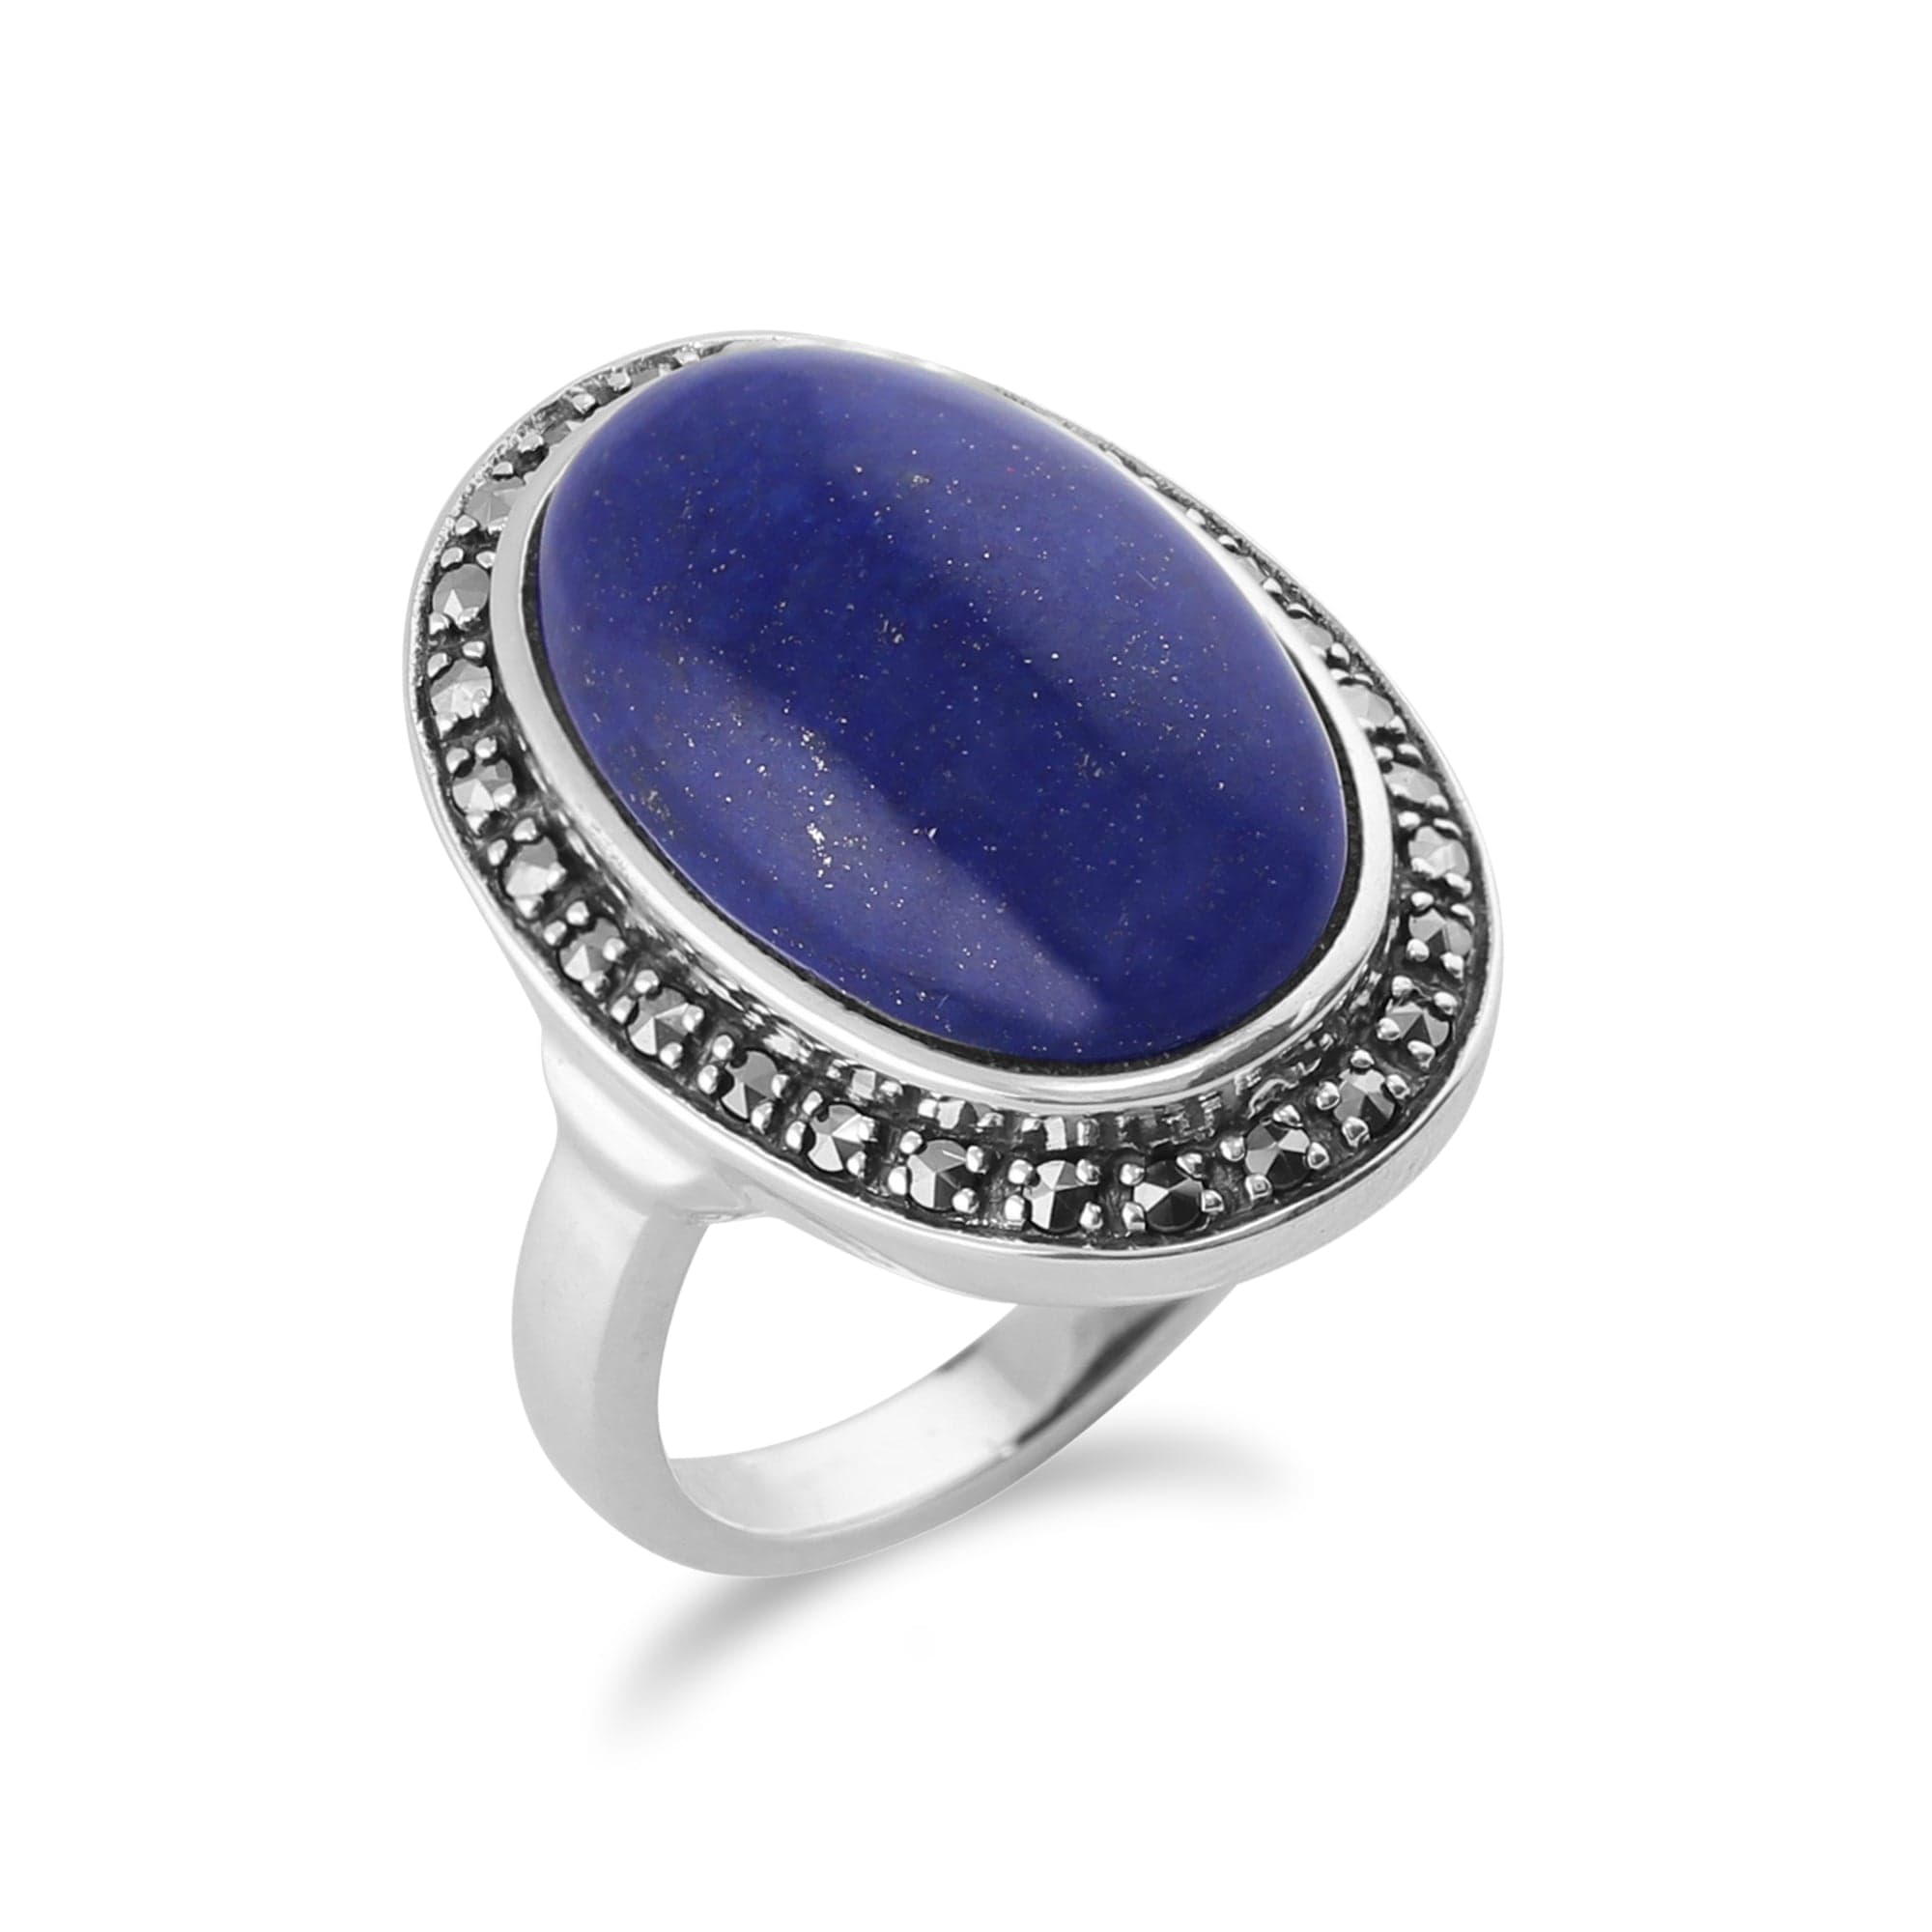 214R072903925 Boho Oval Lapis Lazuli Cabochon & Marcasite Ring in 925 Sterling Silver 2